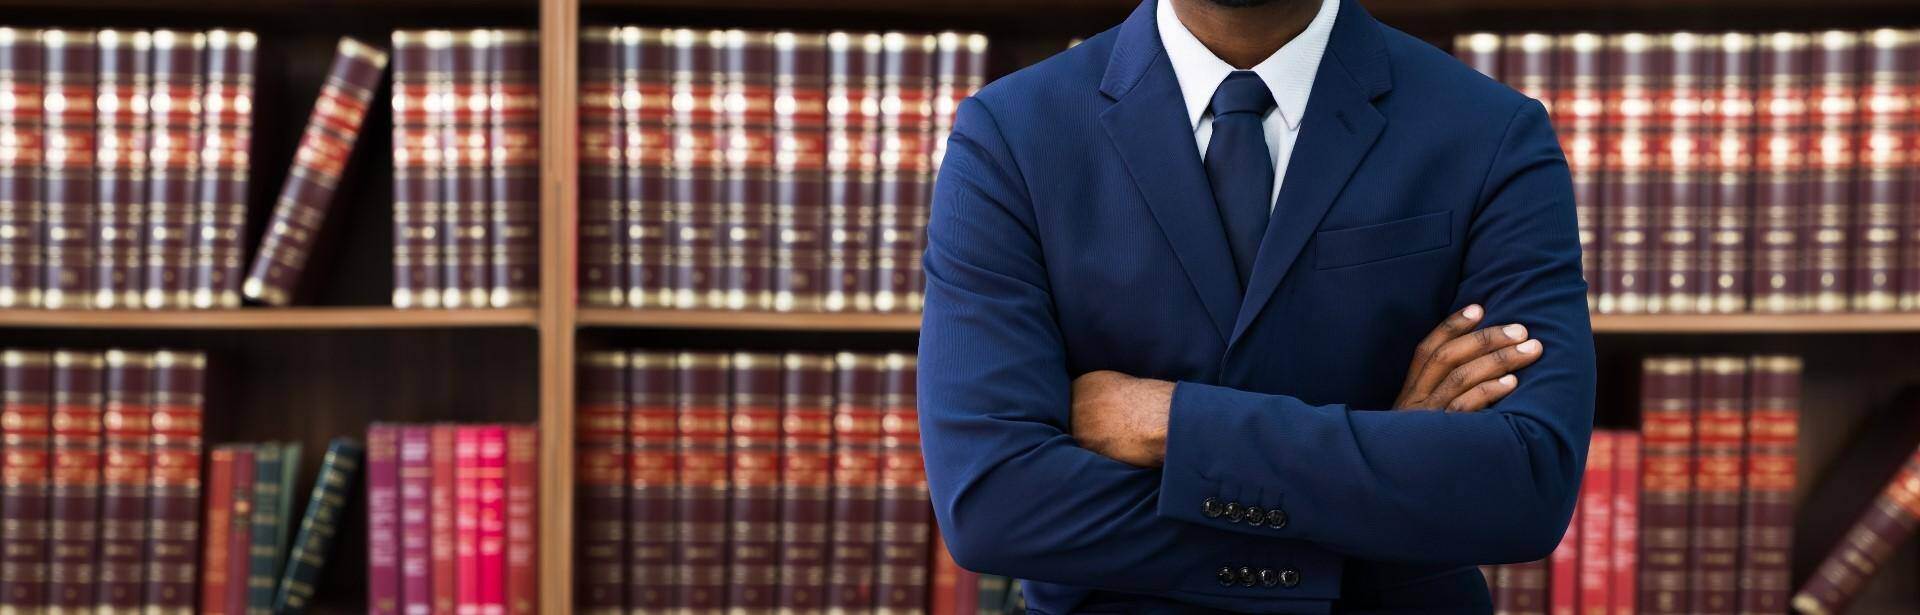 A black lawyer standing in front of a bookshelf of law book in Warner Robins, Georgia